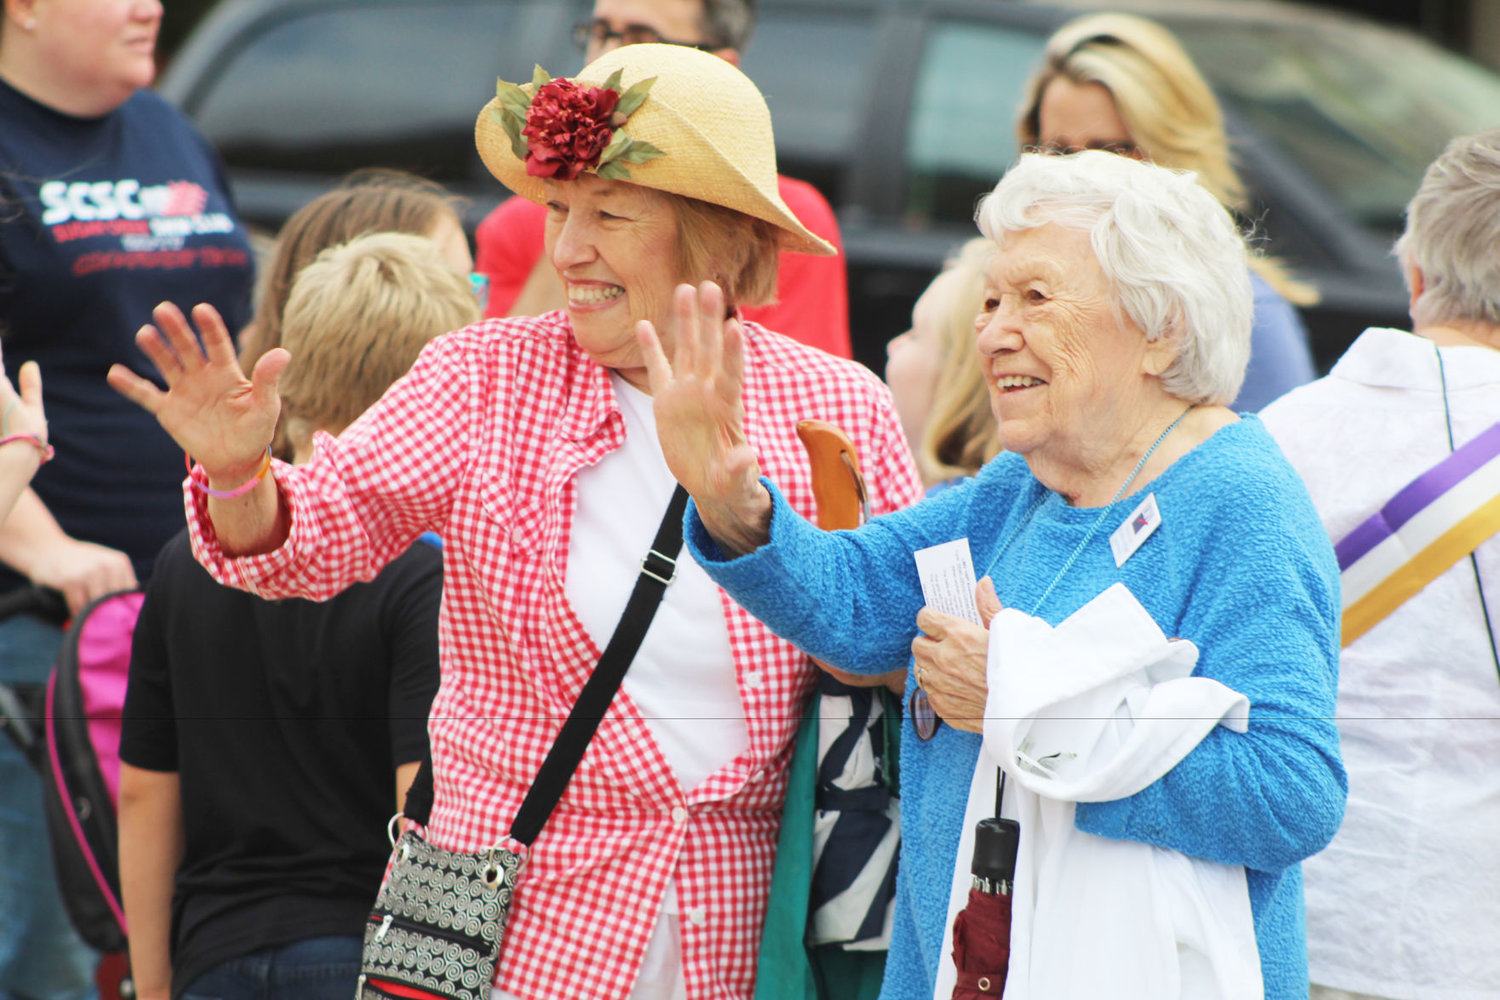 League of Women Voters members Sheridan Hadley, left, and Margy McCafferty wave before a march to commemorate women's suffrage Monday outside the Montgomery County Courthouse.